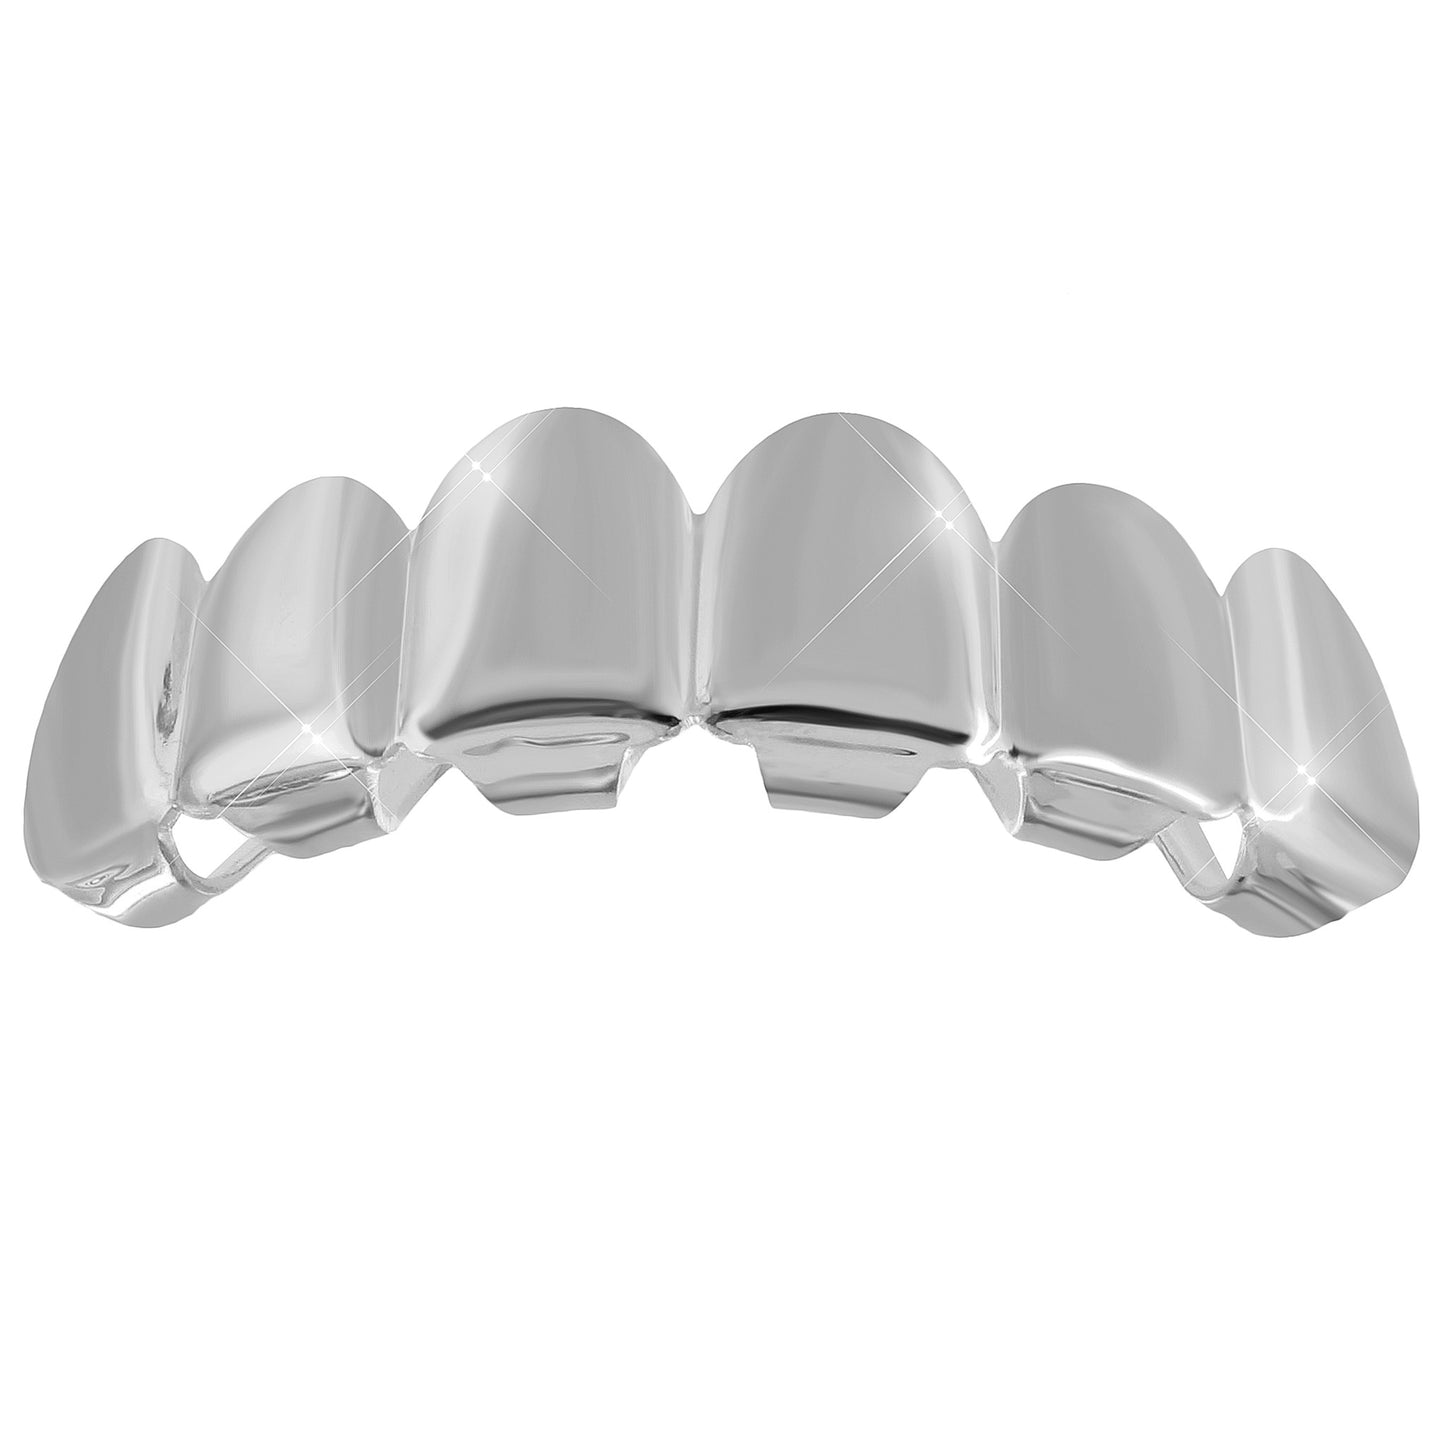 14k White Gold Finish Top Teeth Mouth Grillz Plain